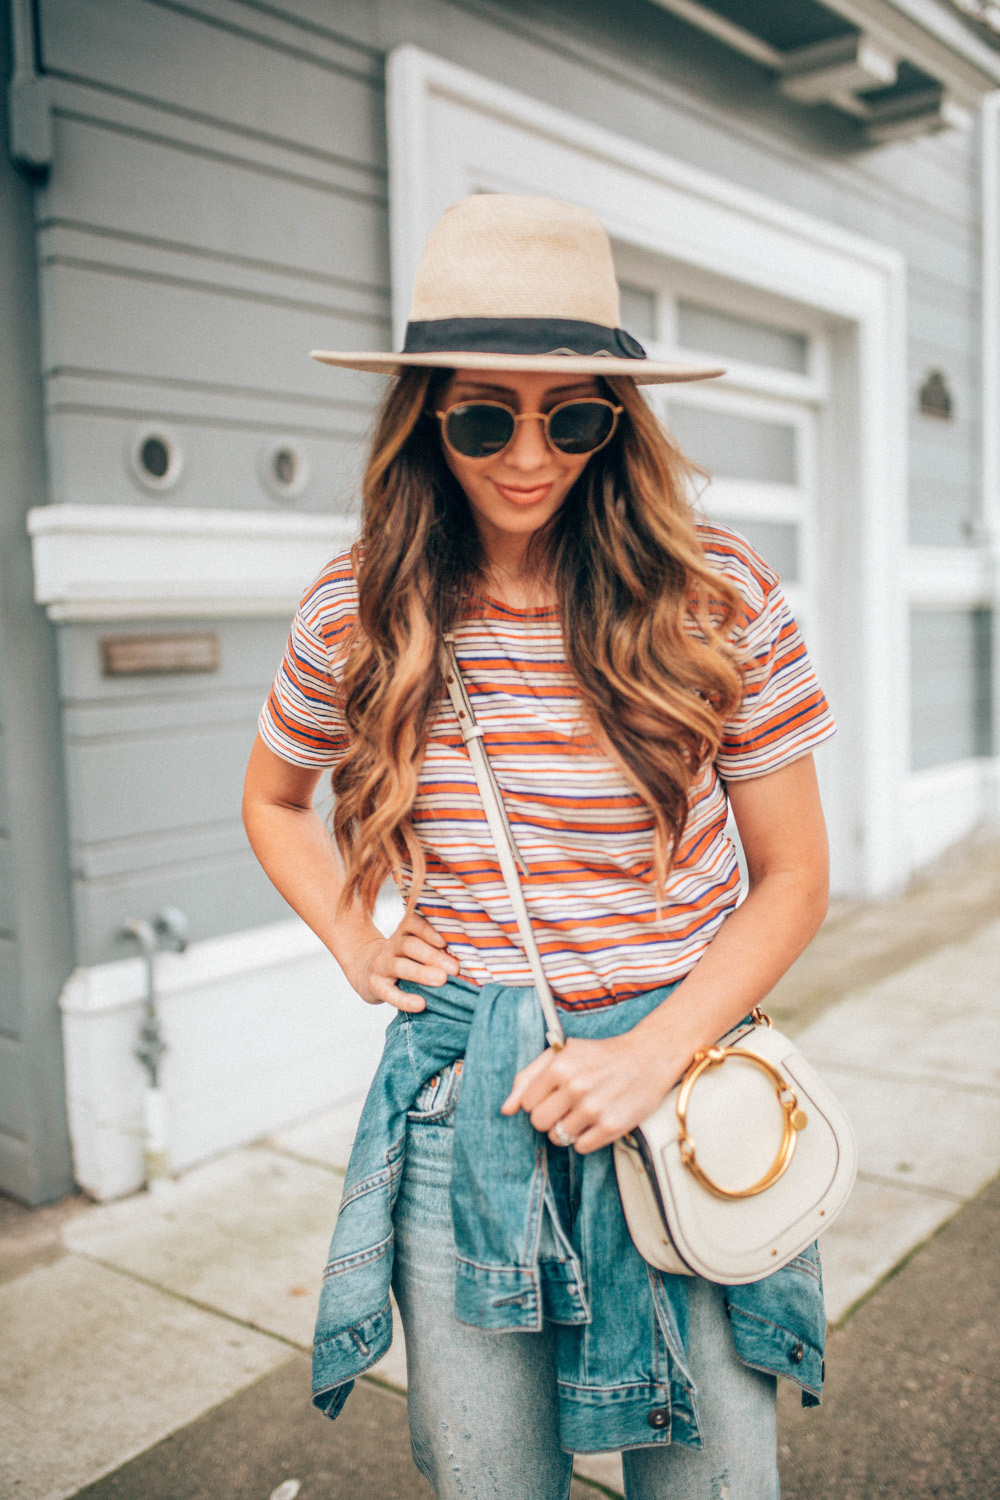 5 Essentials for Spring Outfits by popular San Francisco lifestyle blogger The Girl in The Yellow Dress